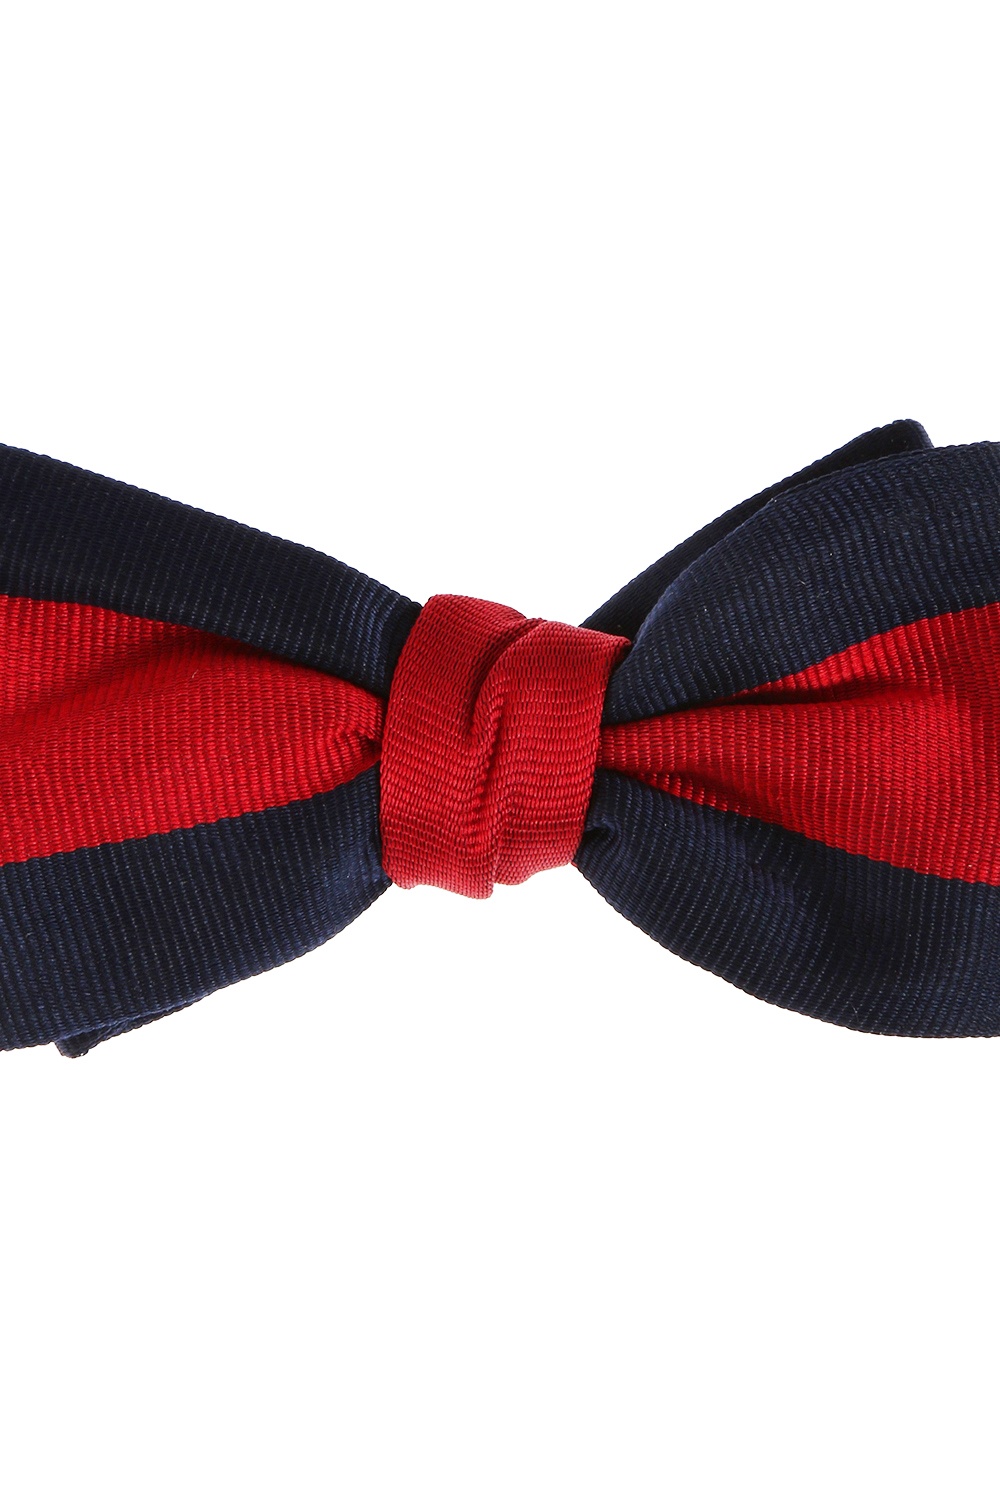 Gucci / Mickey silk bow tie ? or - Brons on Wellington